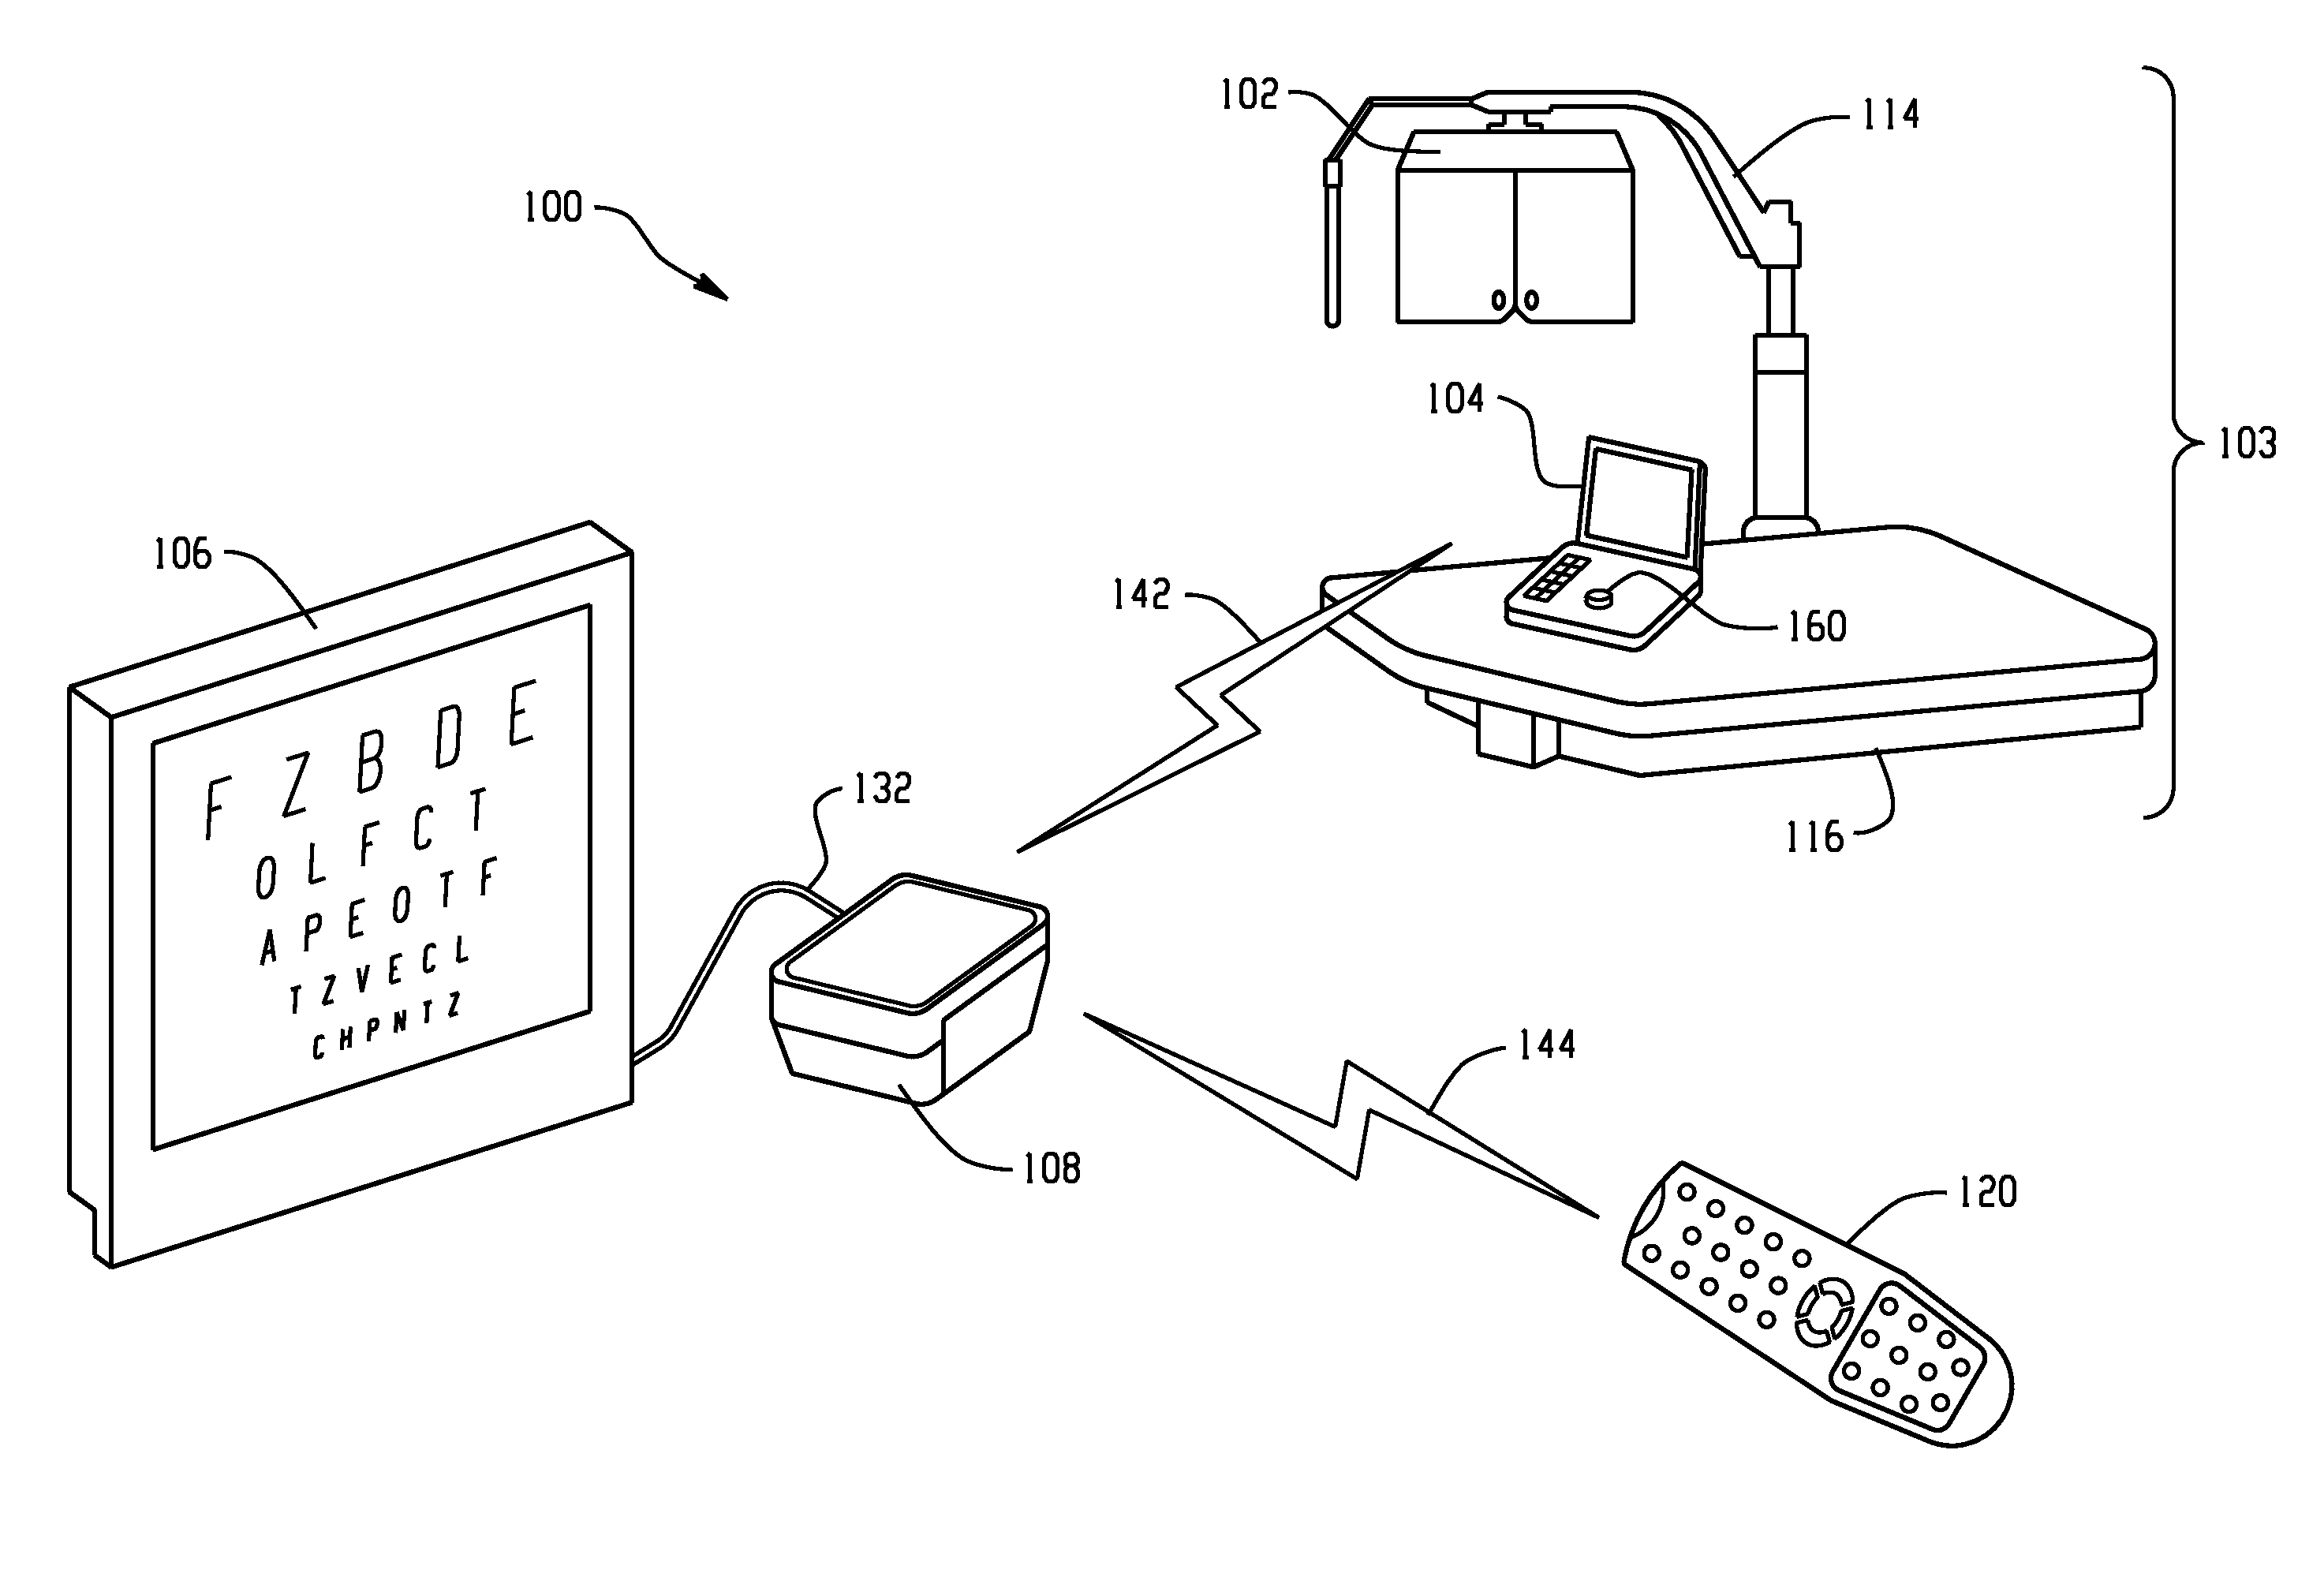 Ophthalmic examination system wireless interface device